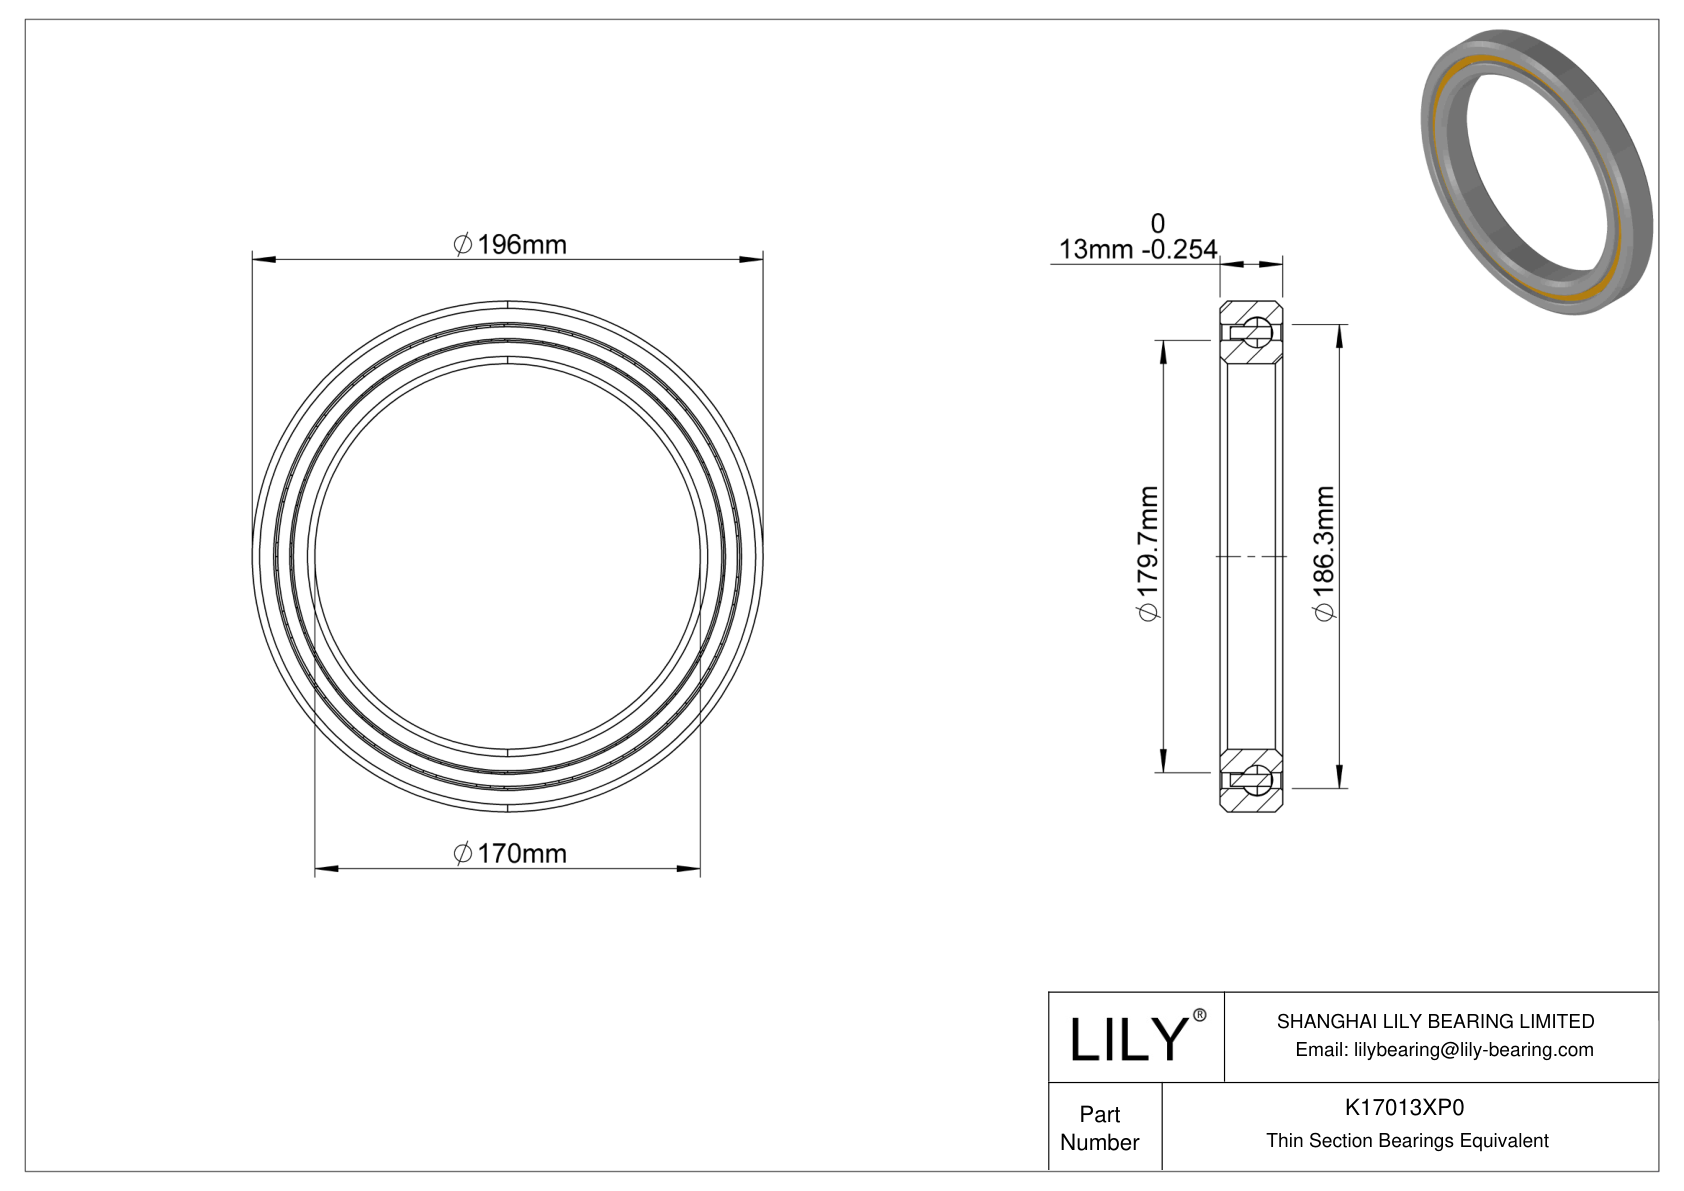 K17013XP0 Constant Section (CS) Bearings cad drawing